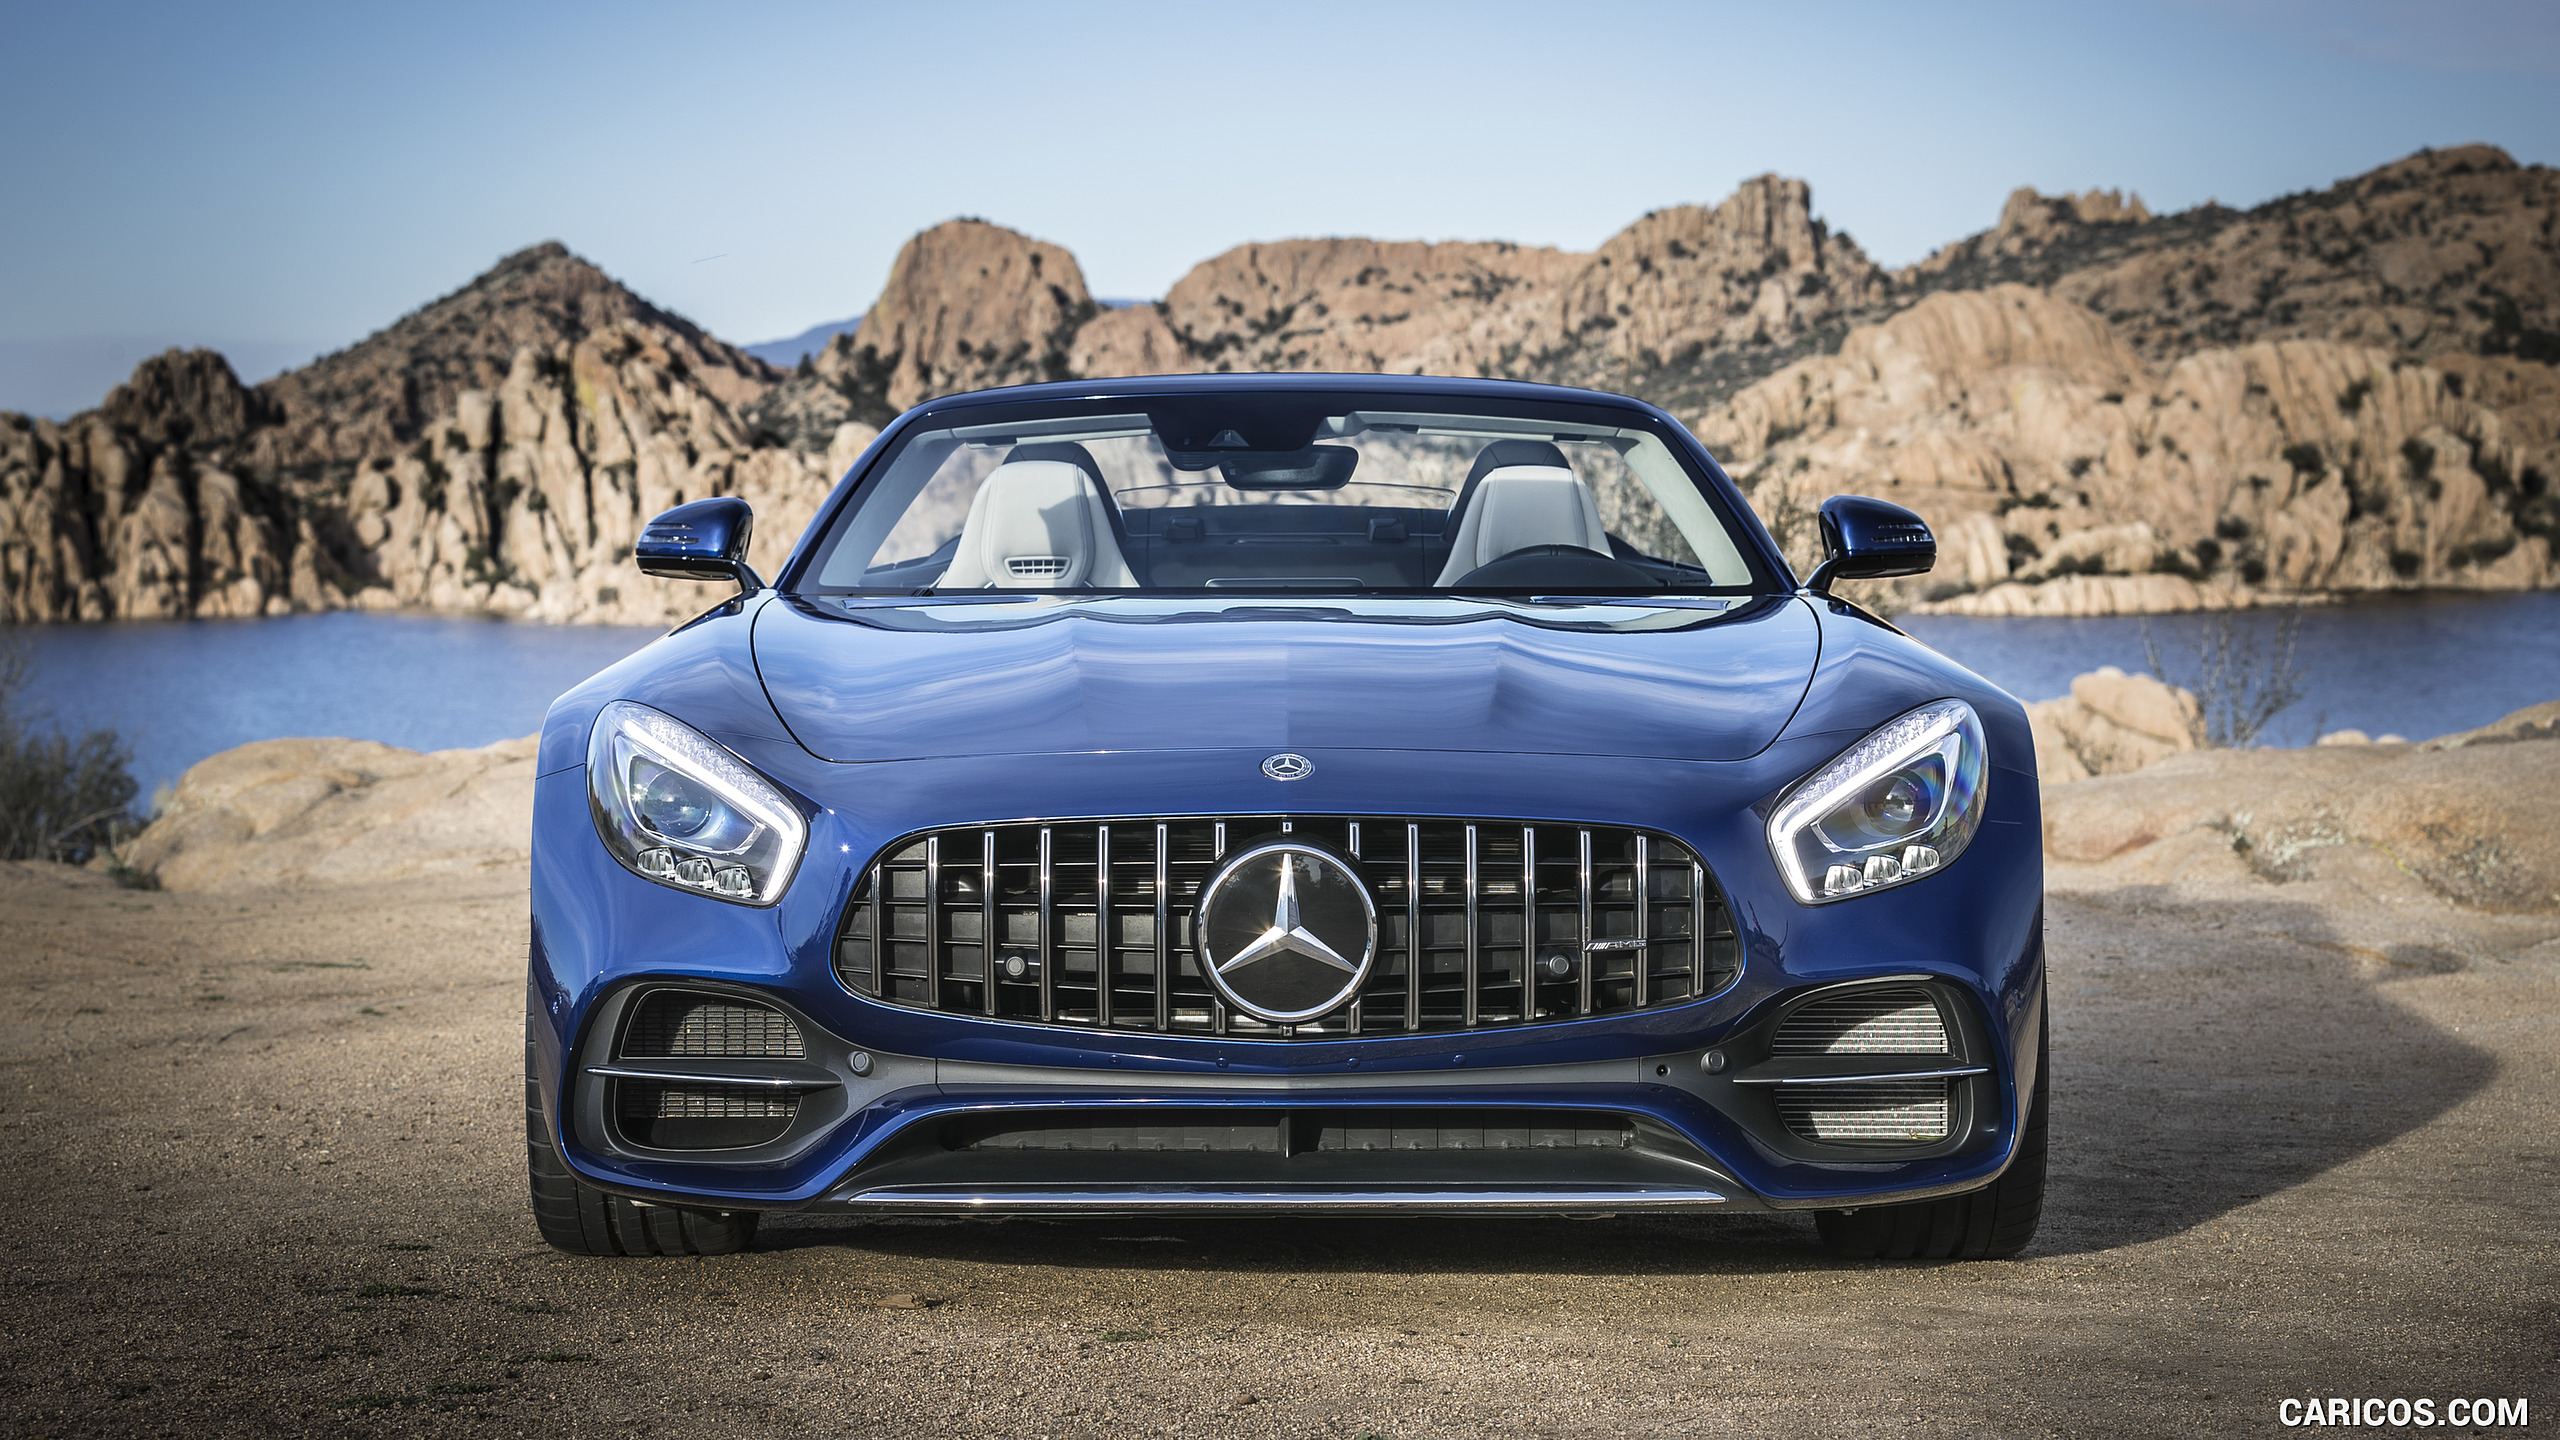 2018 Mercedes-AMG GT Roadster - Front, #124 of 350